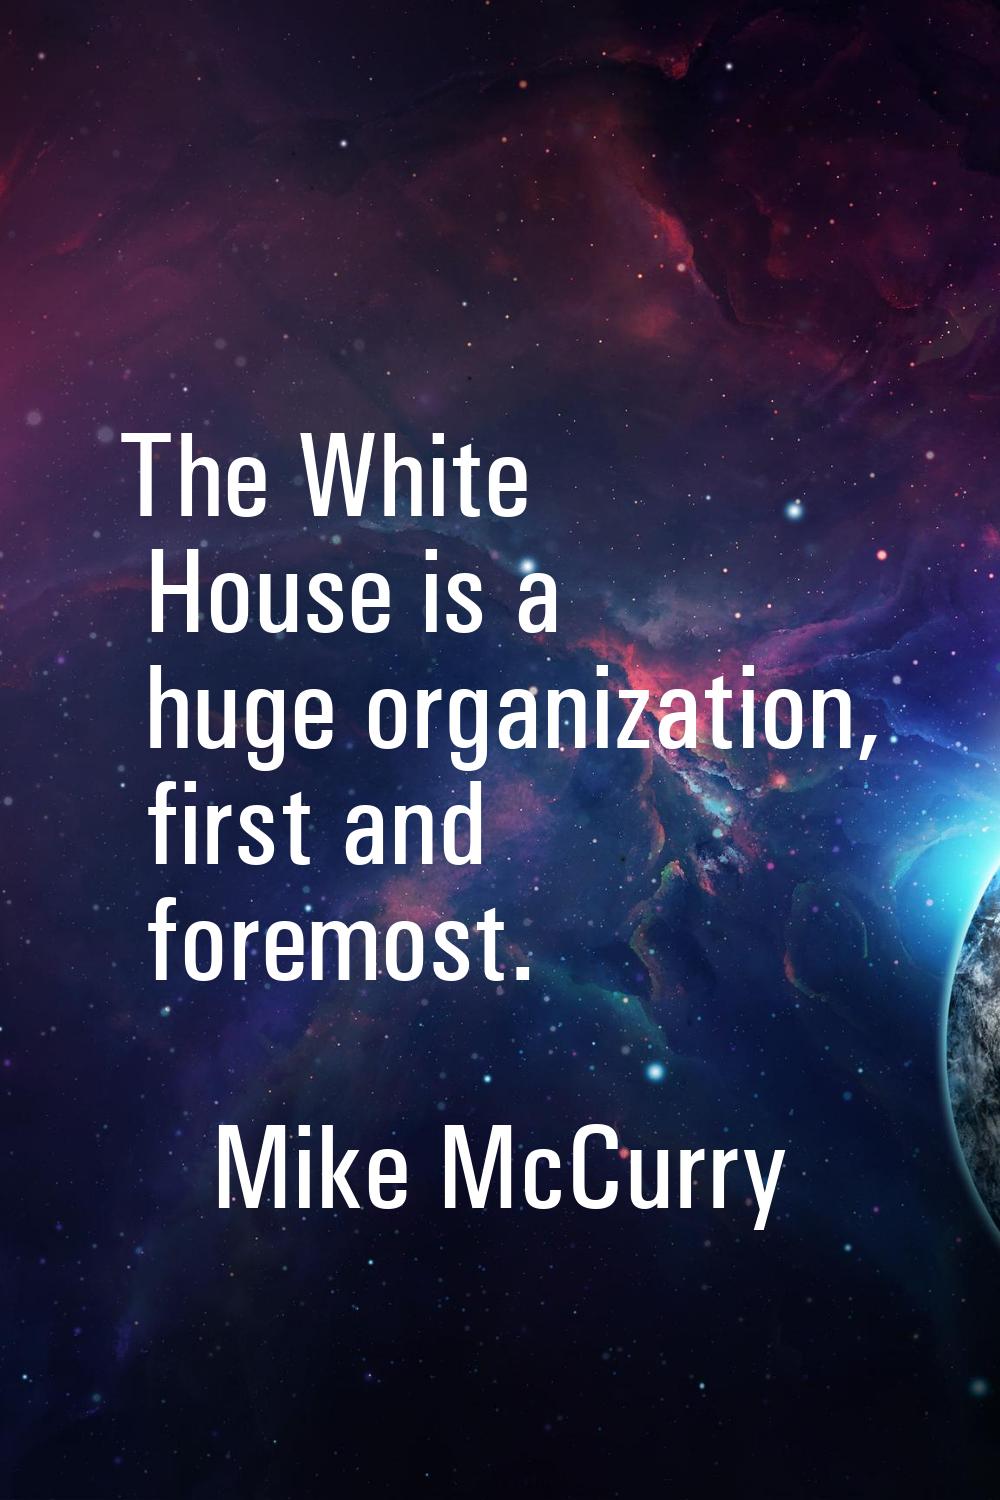 The White House is a huge organization, first and foremost.